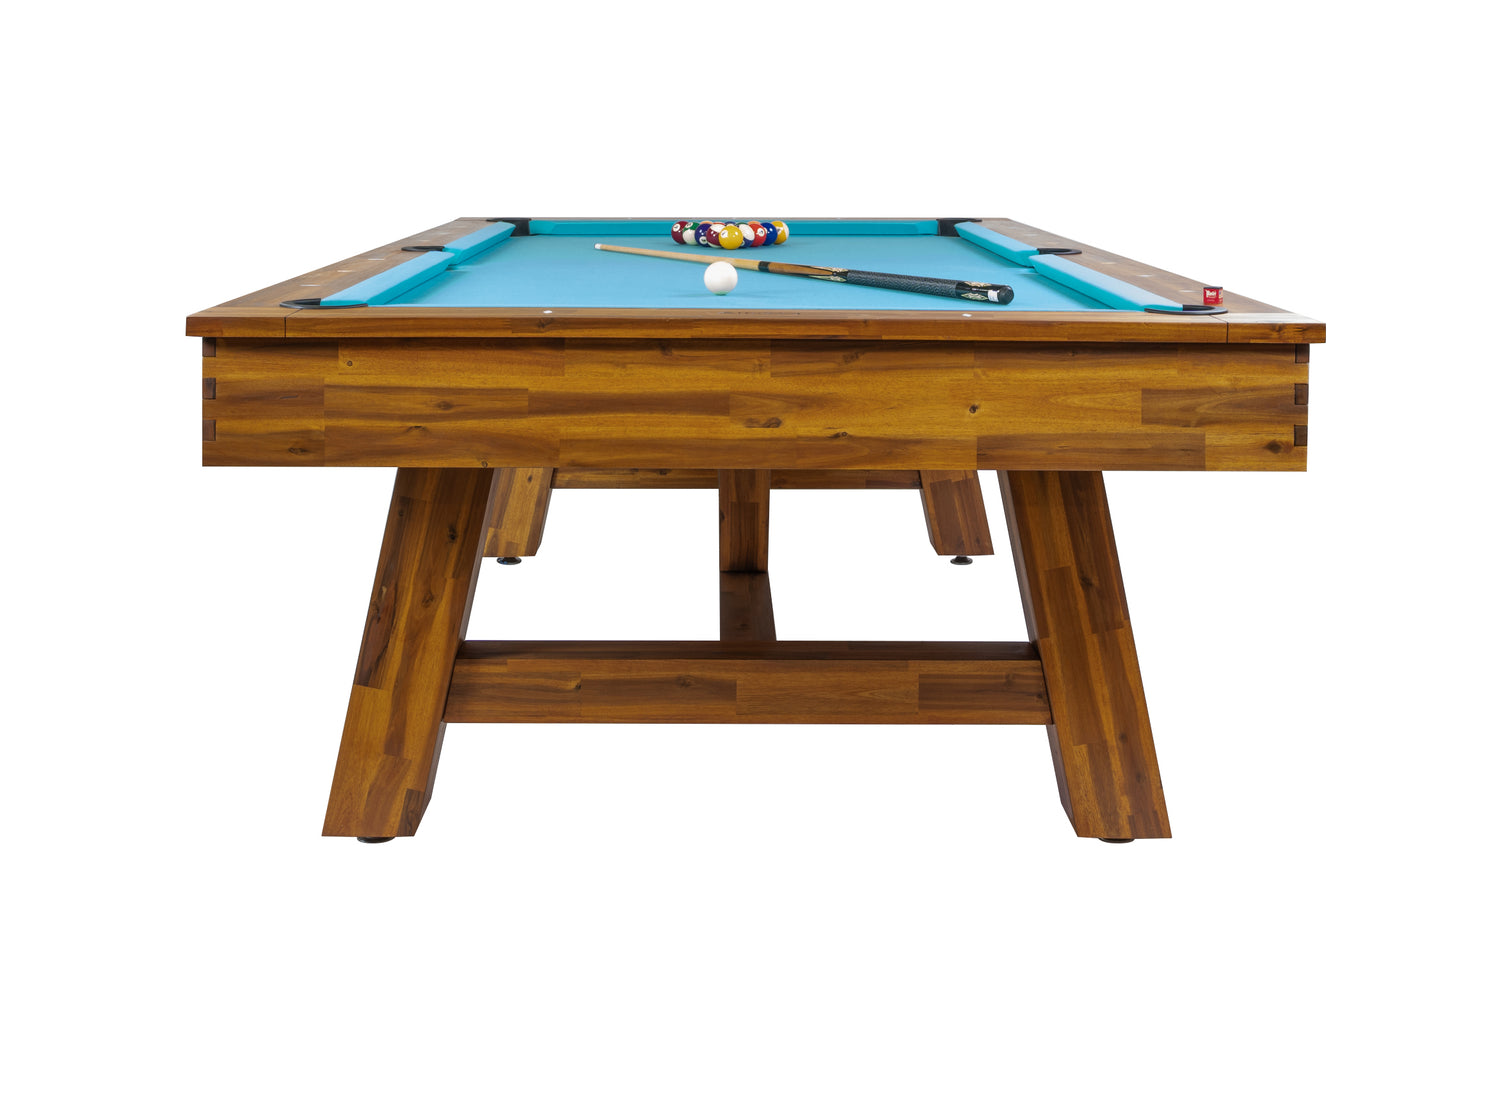 Legacy Billiards Emory 8 Ft Outdoor Pool Table in Natural Acacia Finish with Pool Aqua Cloth End View with Racked Pool Balls and Cue